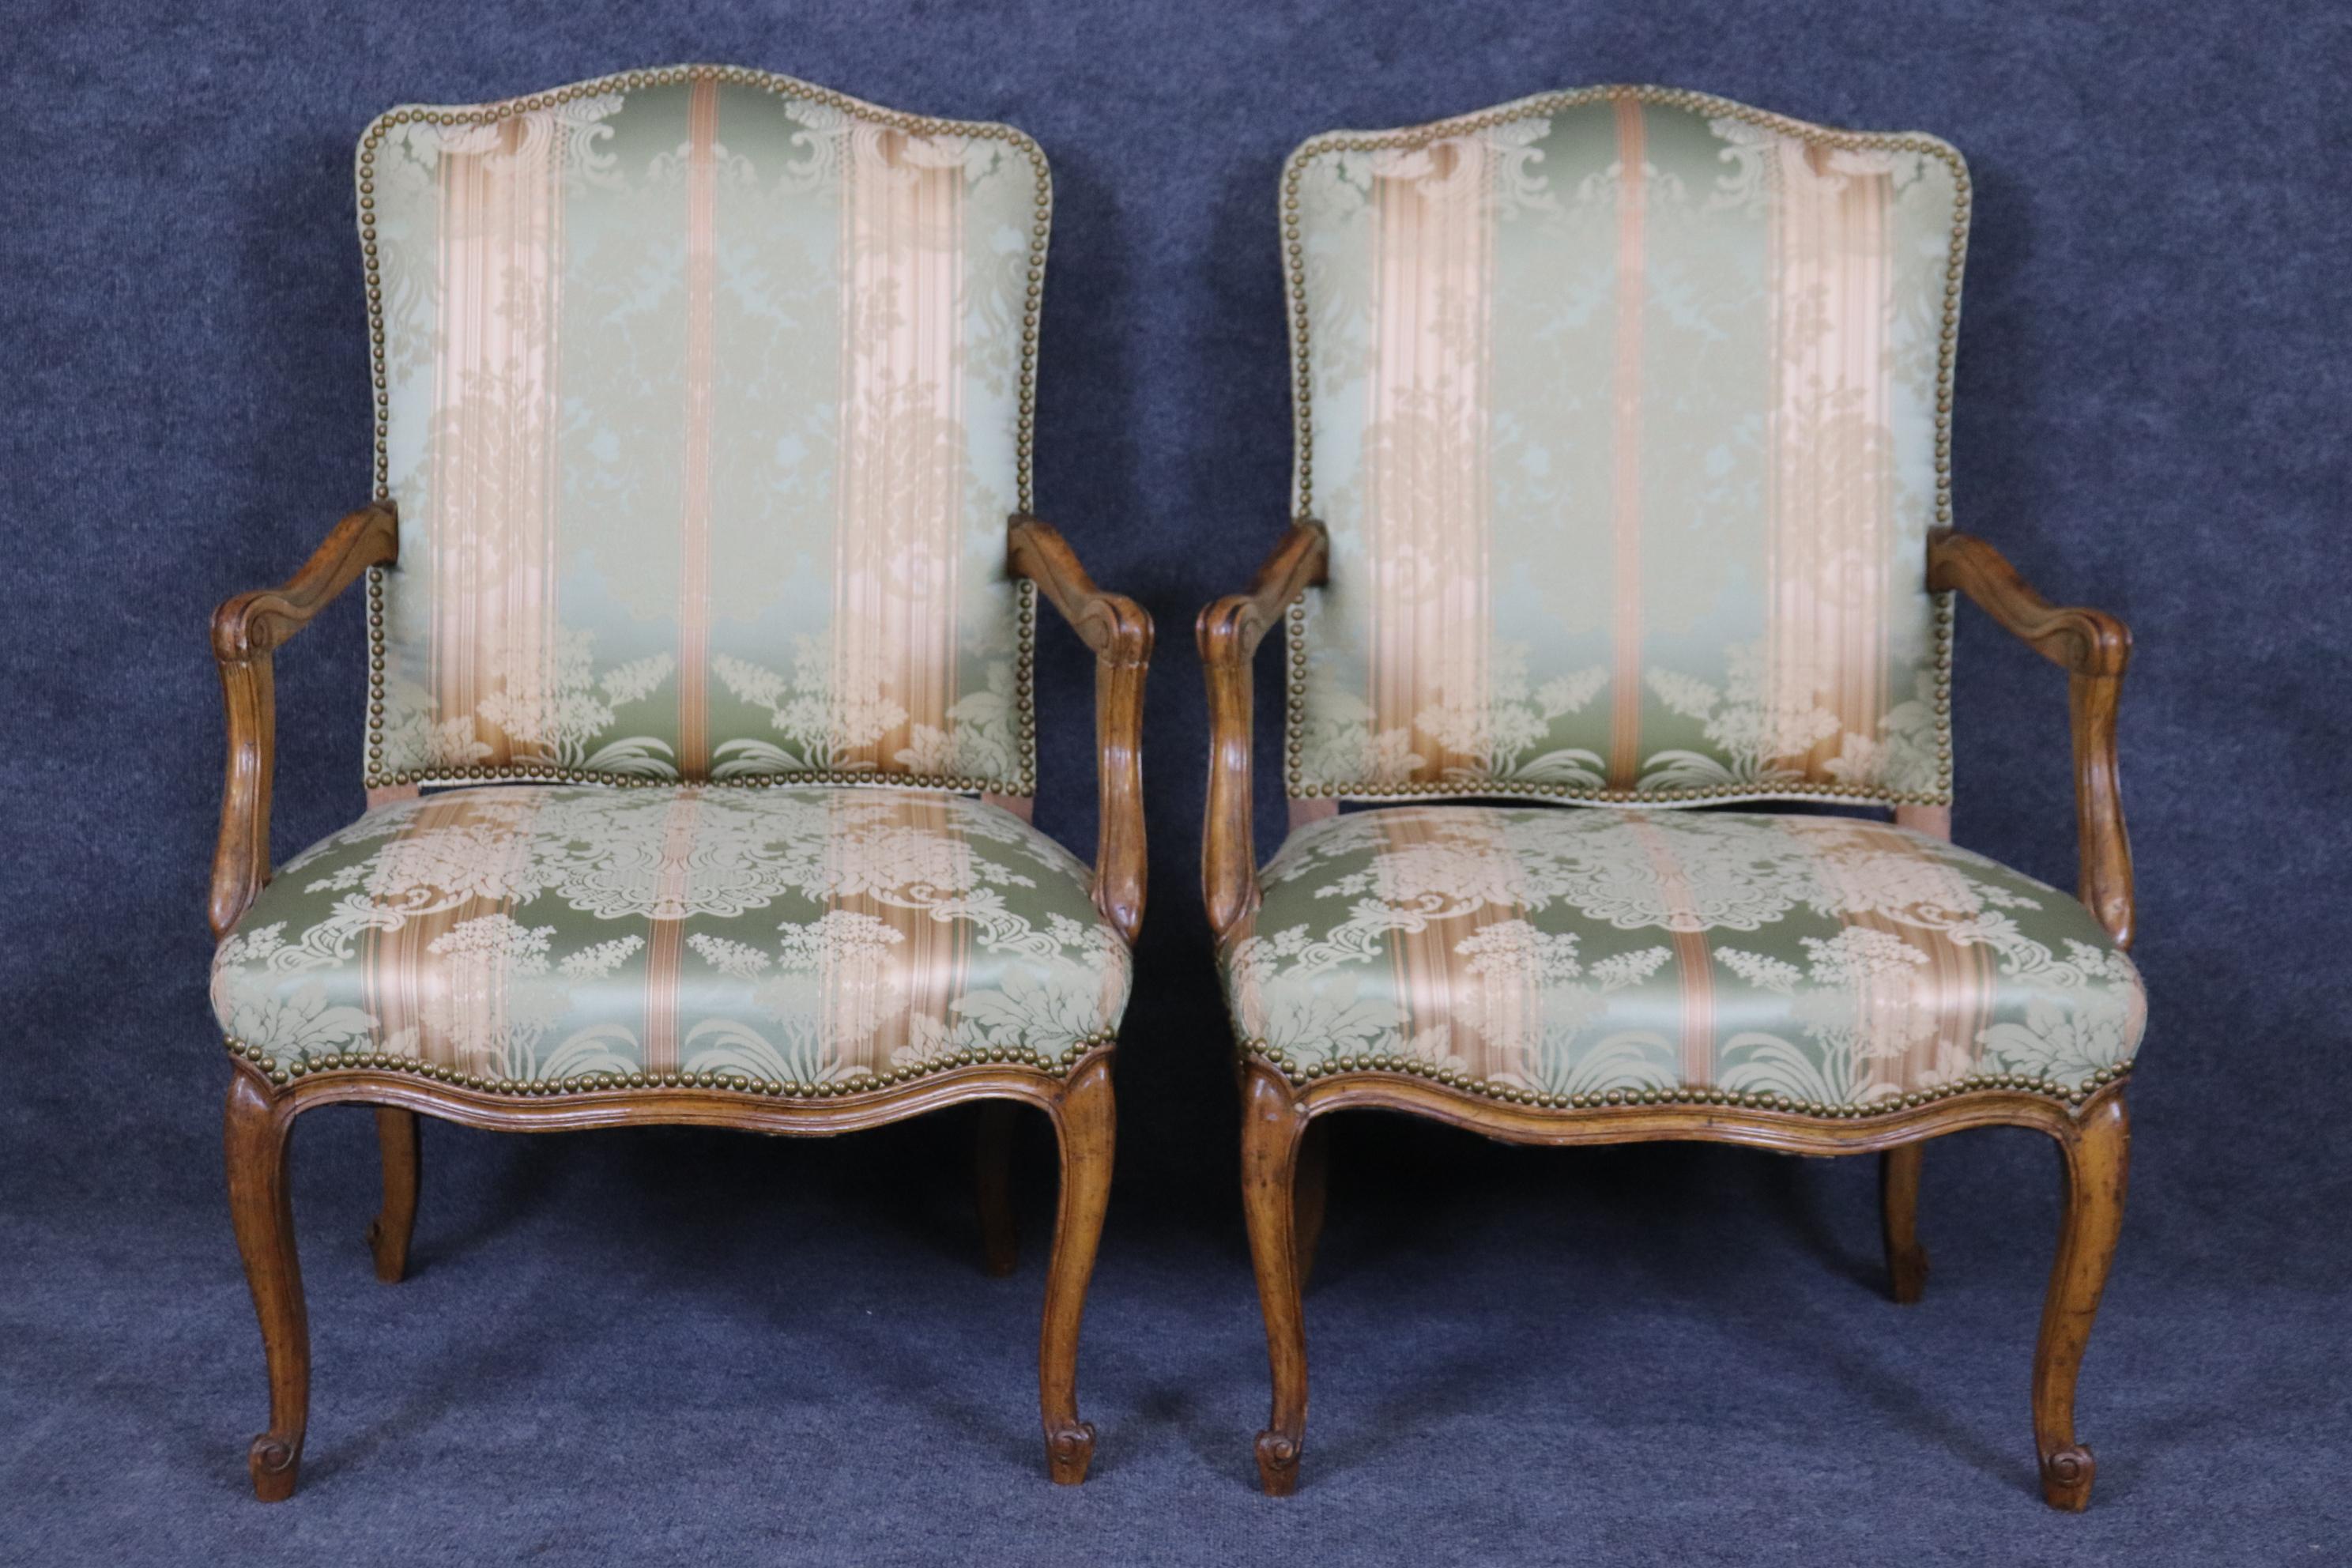 This is a superb pair of silk damask upholstered and nailhead trimmed armchairs in the Louis XV style. The chairs are in good condition and very fresh and clean. They are used so there may be stains or imperfections that can't be seen on camera.